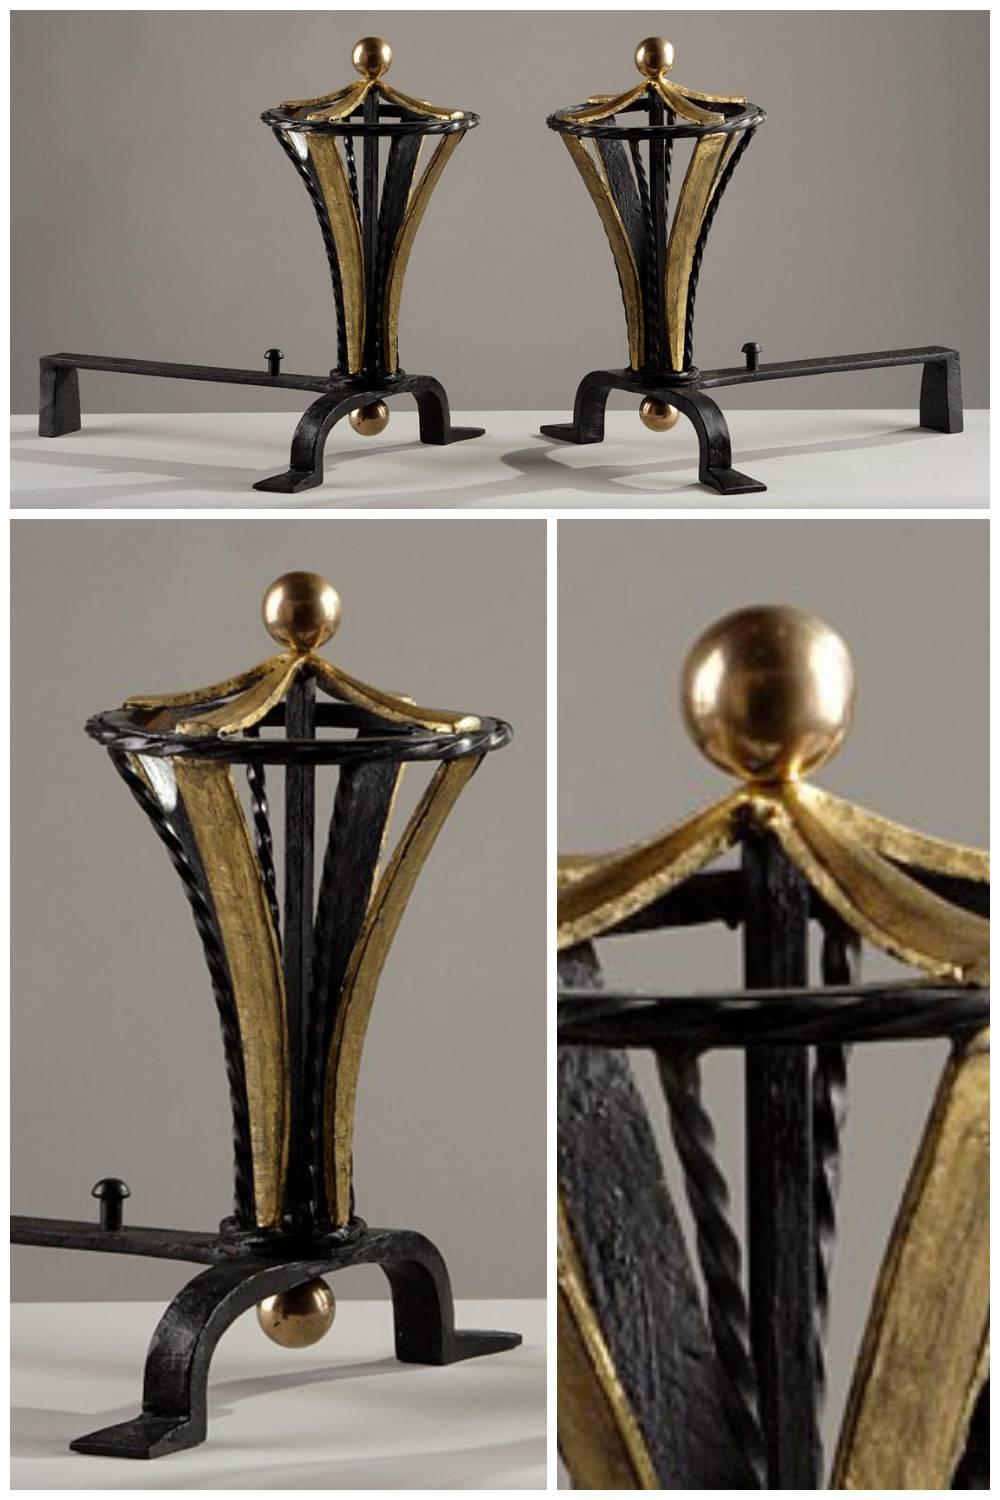 A pair of patinated and gilded iron wrought Art Deco chenets,

circa 1940.
Dimensions: W 13.4 in, D 12.2in, H 14.6 in.
Dimensions: L 34cm, P 31cm, H 37cm.
         